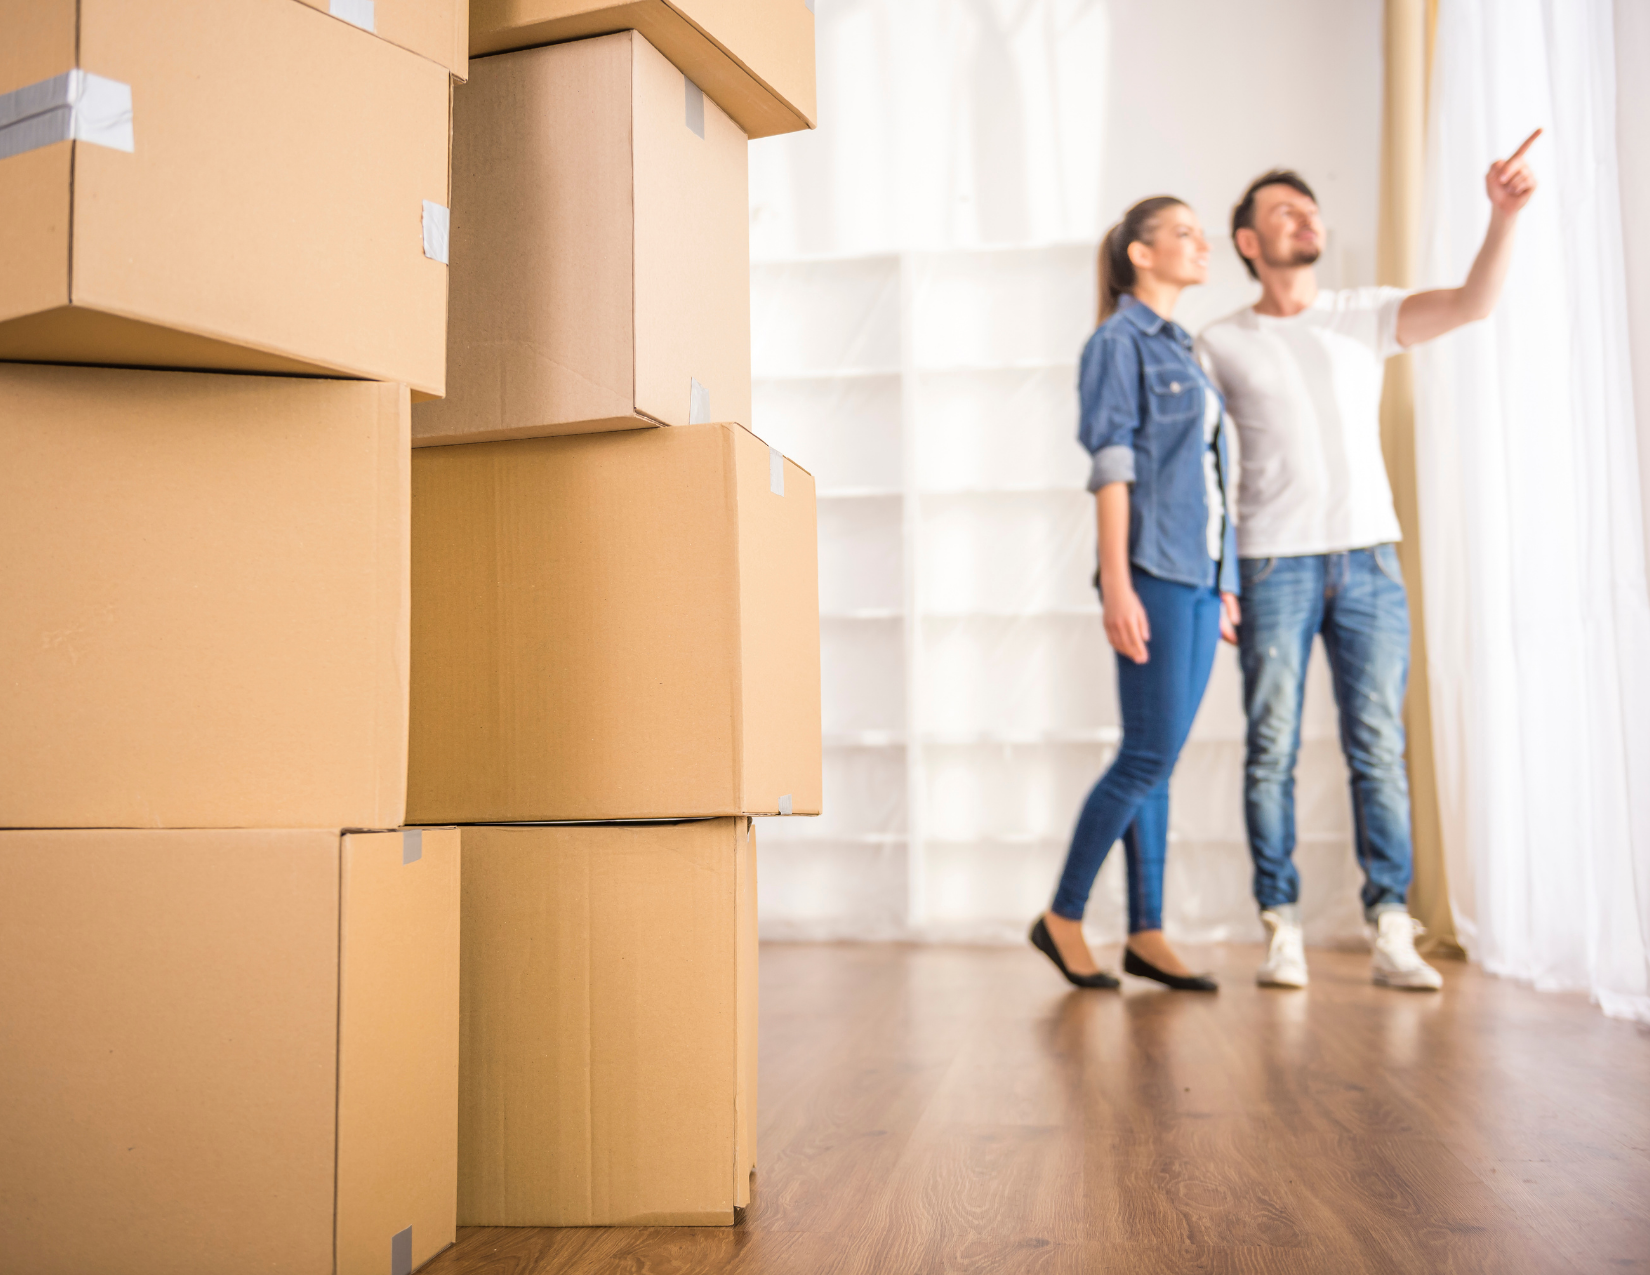 A couple with moving boxes inside a house